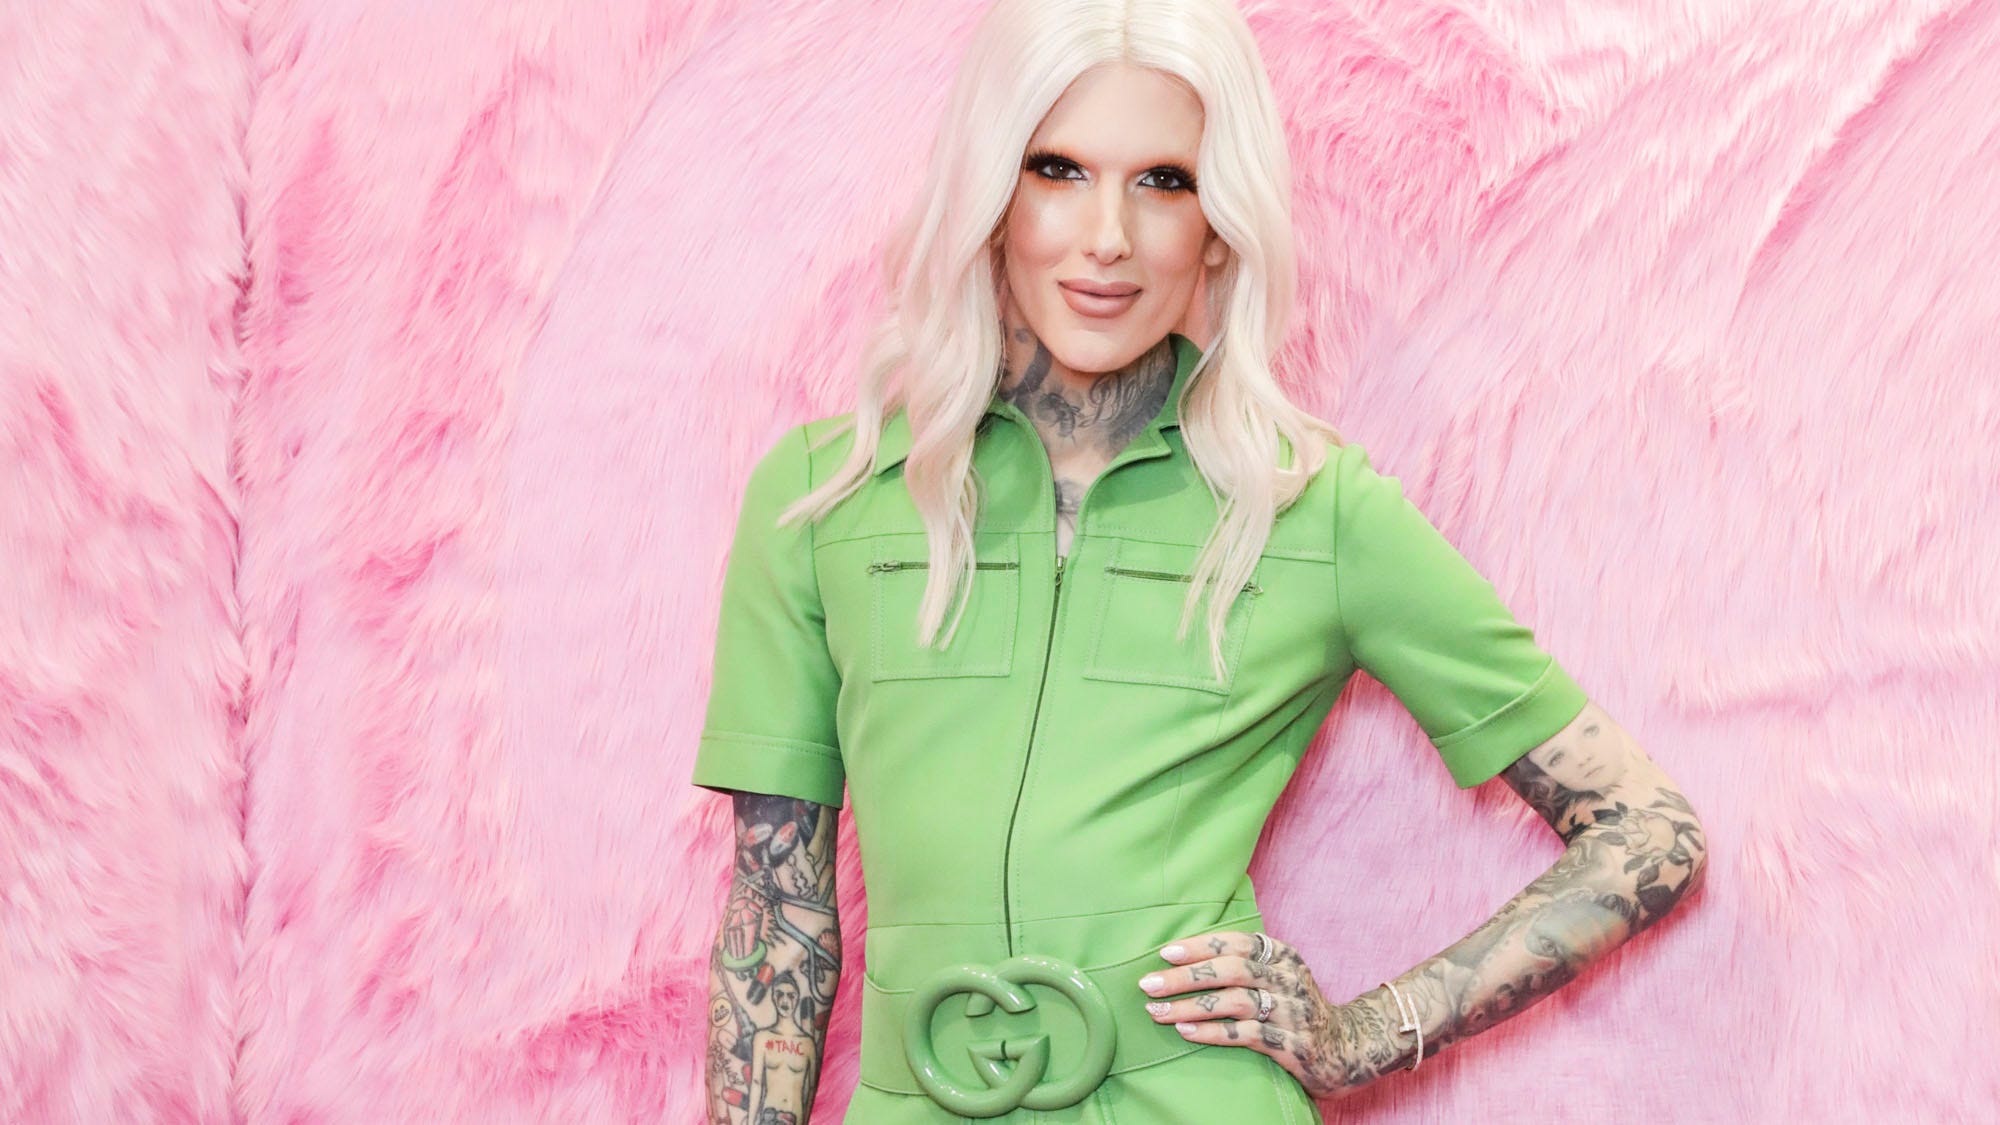 Jeffree Star has ‘painful pain’ after his car accident: ‘Time to heal’